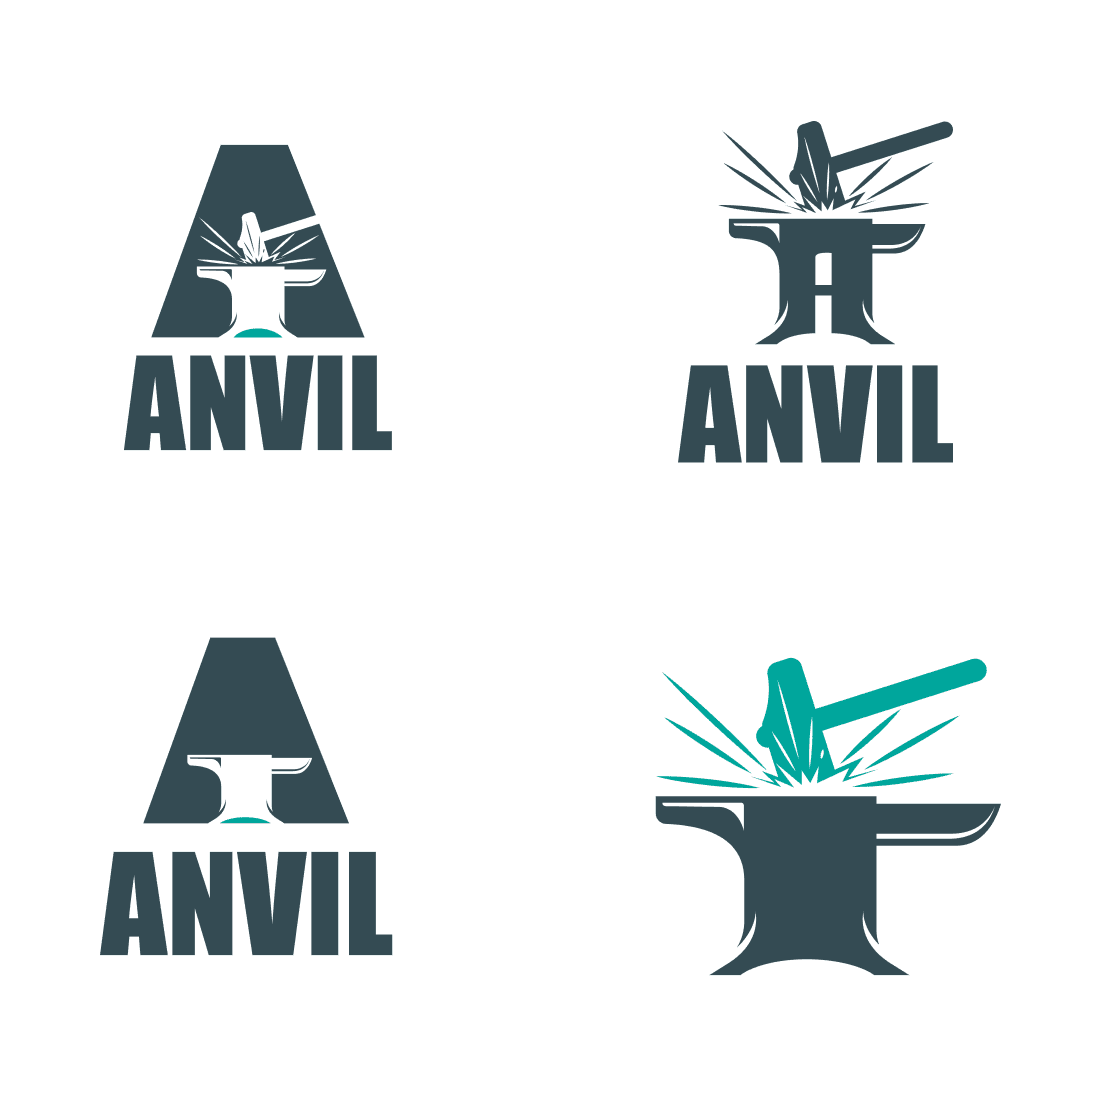 Four images of an anvil being hit with a hammer.